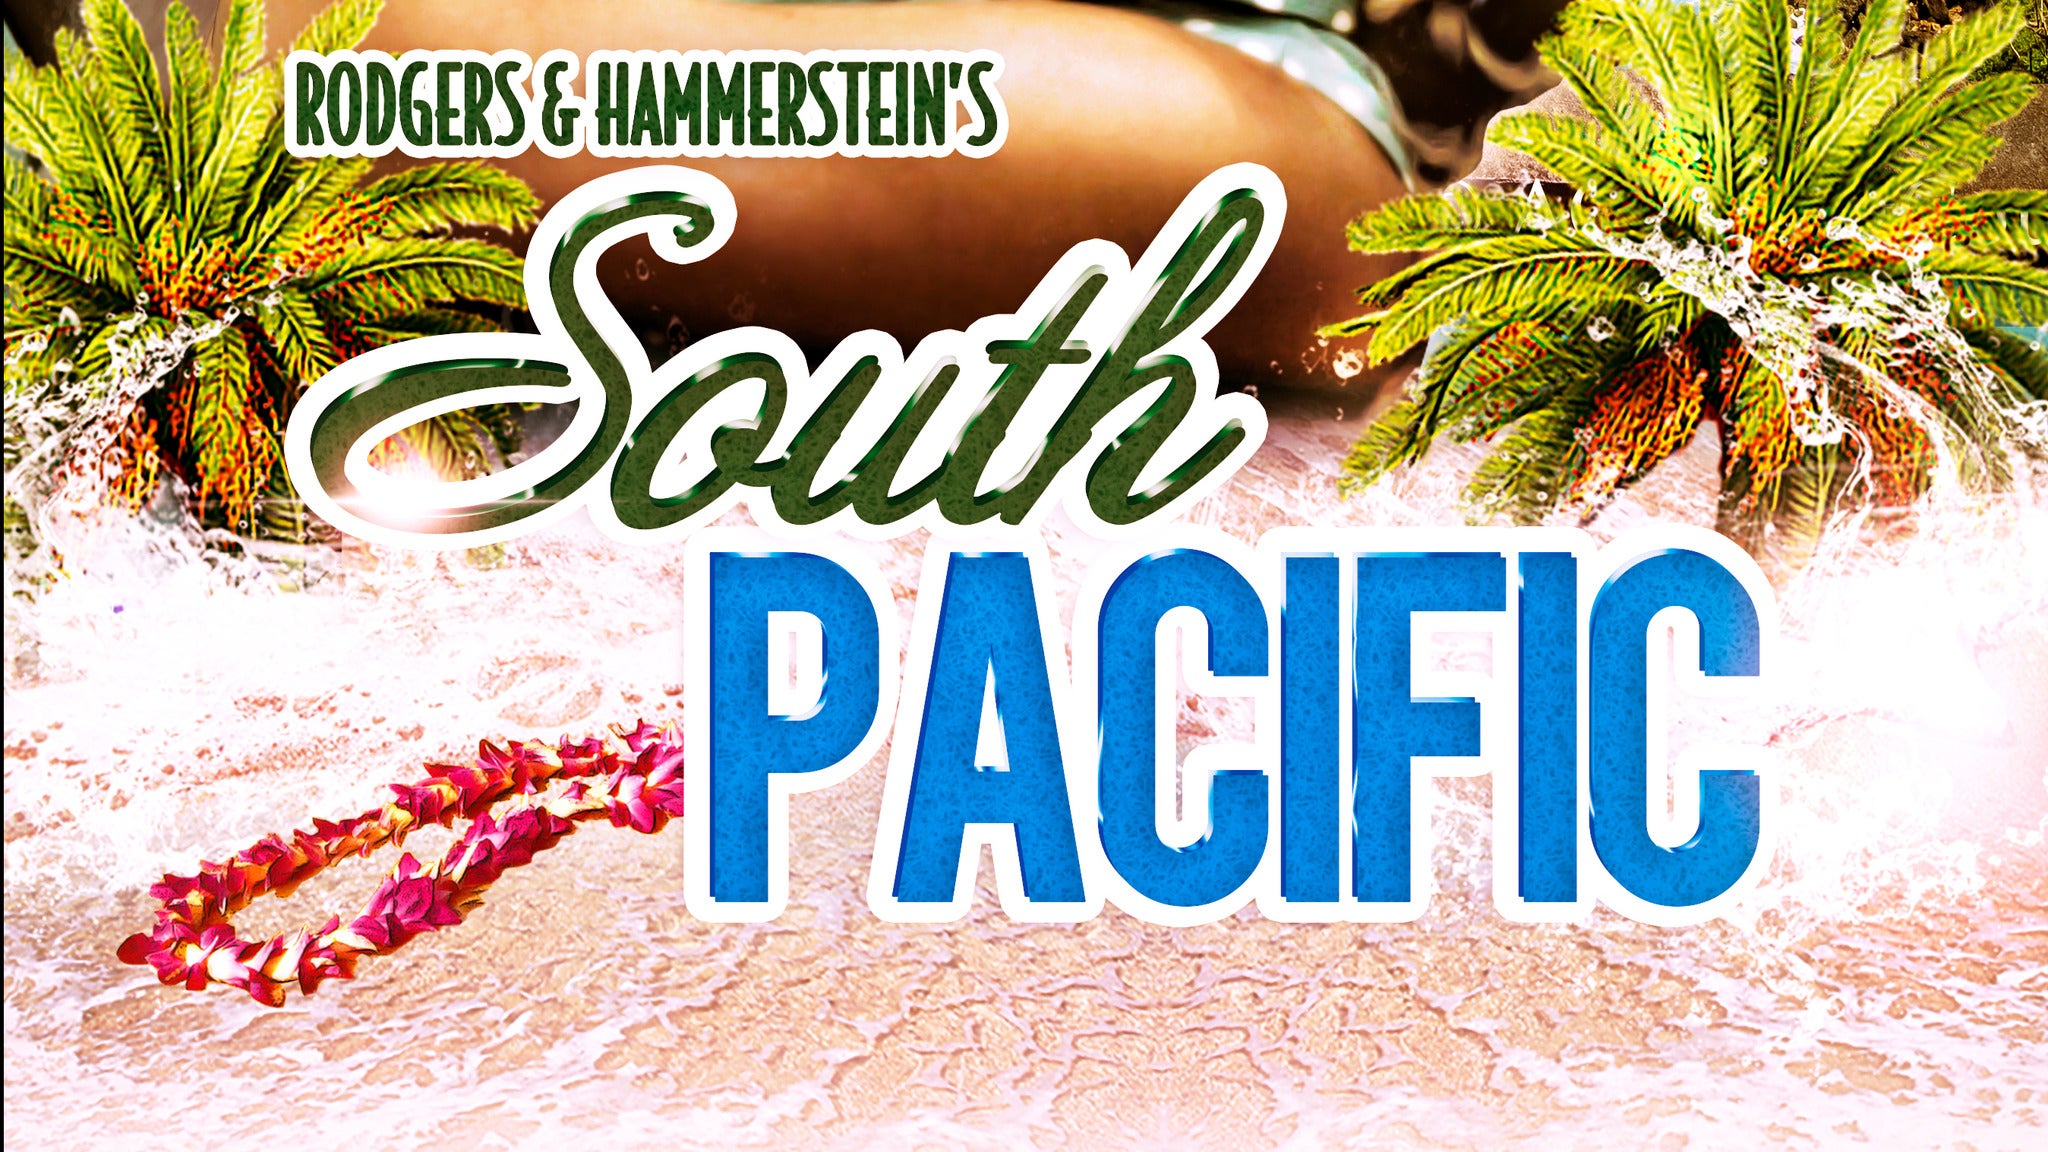 South Pacific presale password for early tickets in Jackson